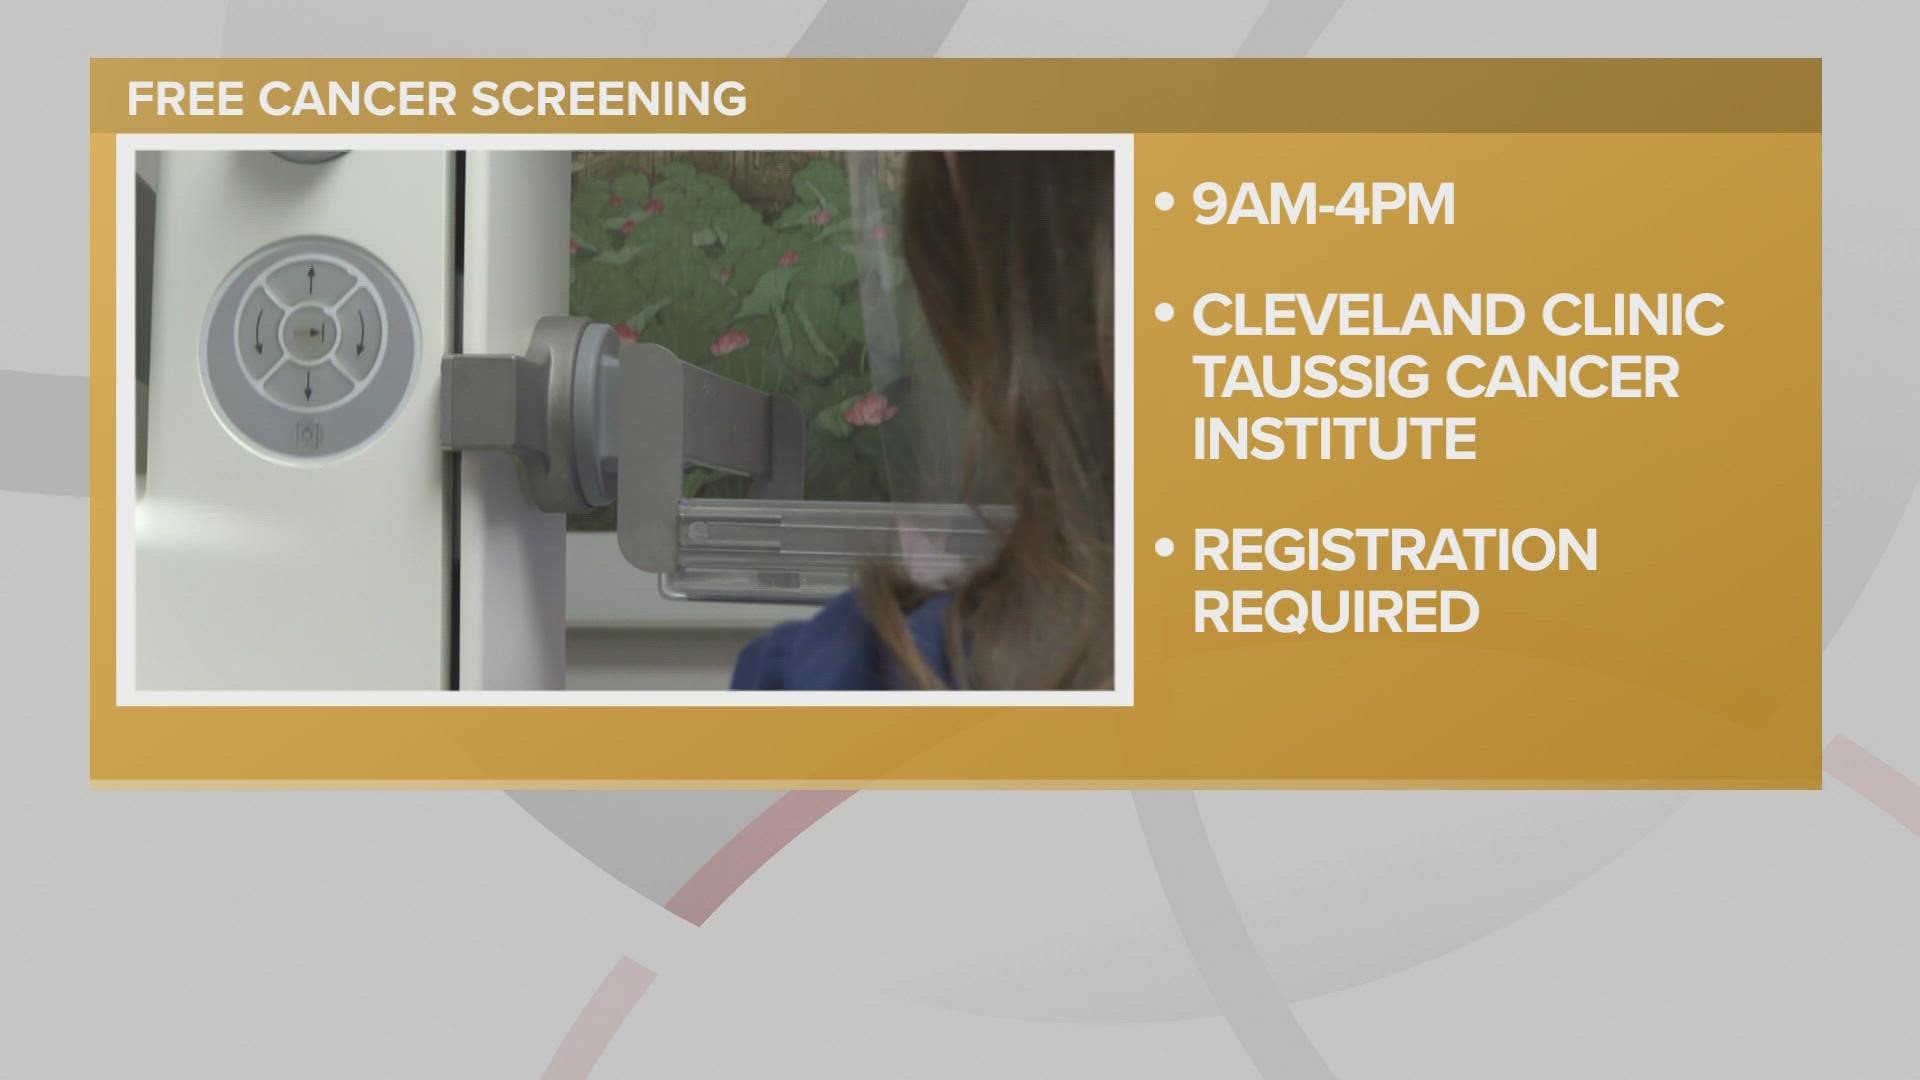 Cleveland Clinic is holding free cancer screenings on Oct. 22, 2022.